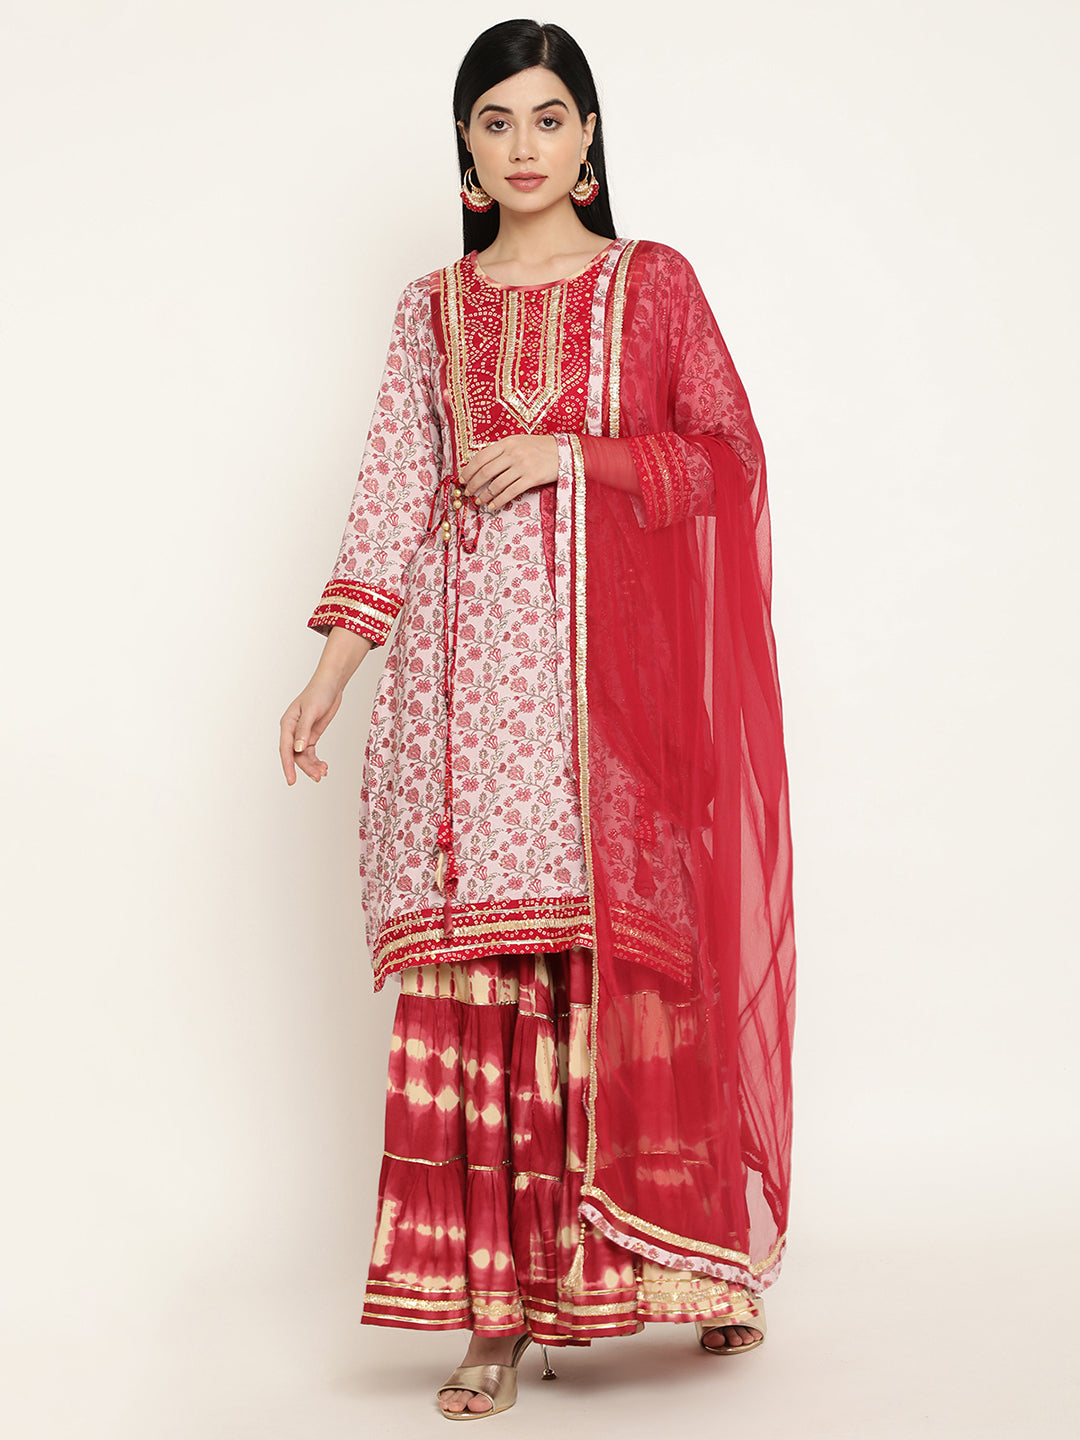 ROSE PINK SINGLE TIERED SHARARA PANT SET WITH MULTI COLOURED THREADWORK  KURTA TOP AND MATCHING NECKLACE STYLE DUPATTA WITH ABLA DETAILS   Seasons India